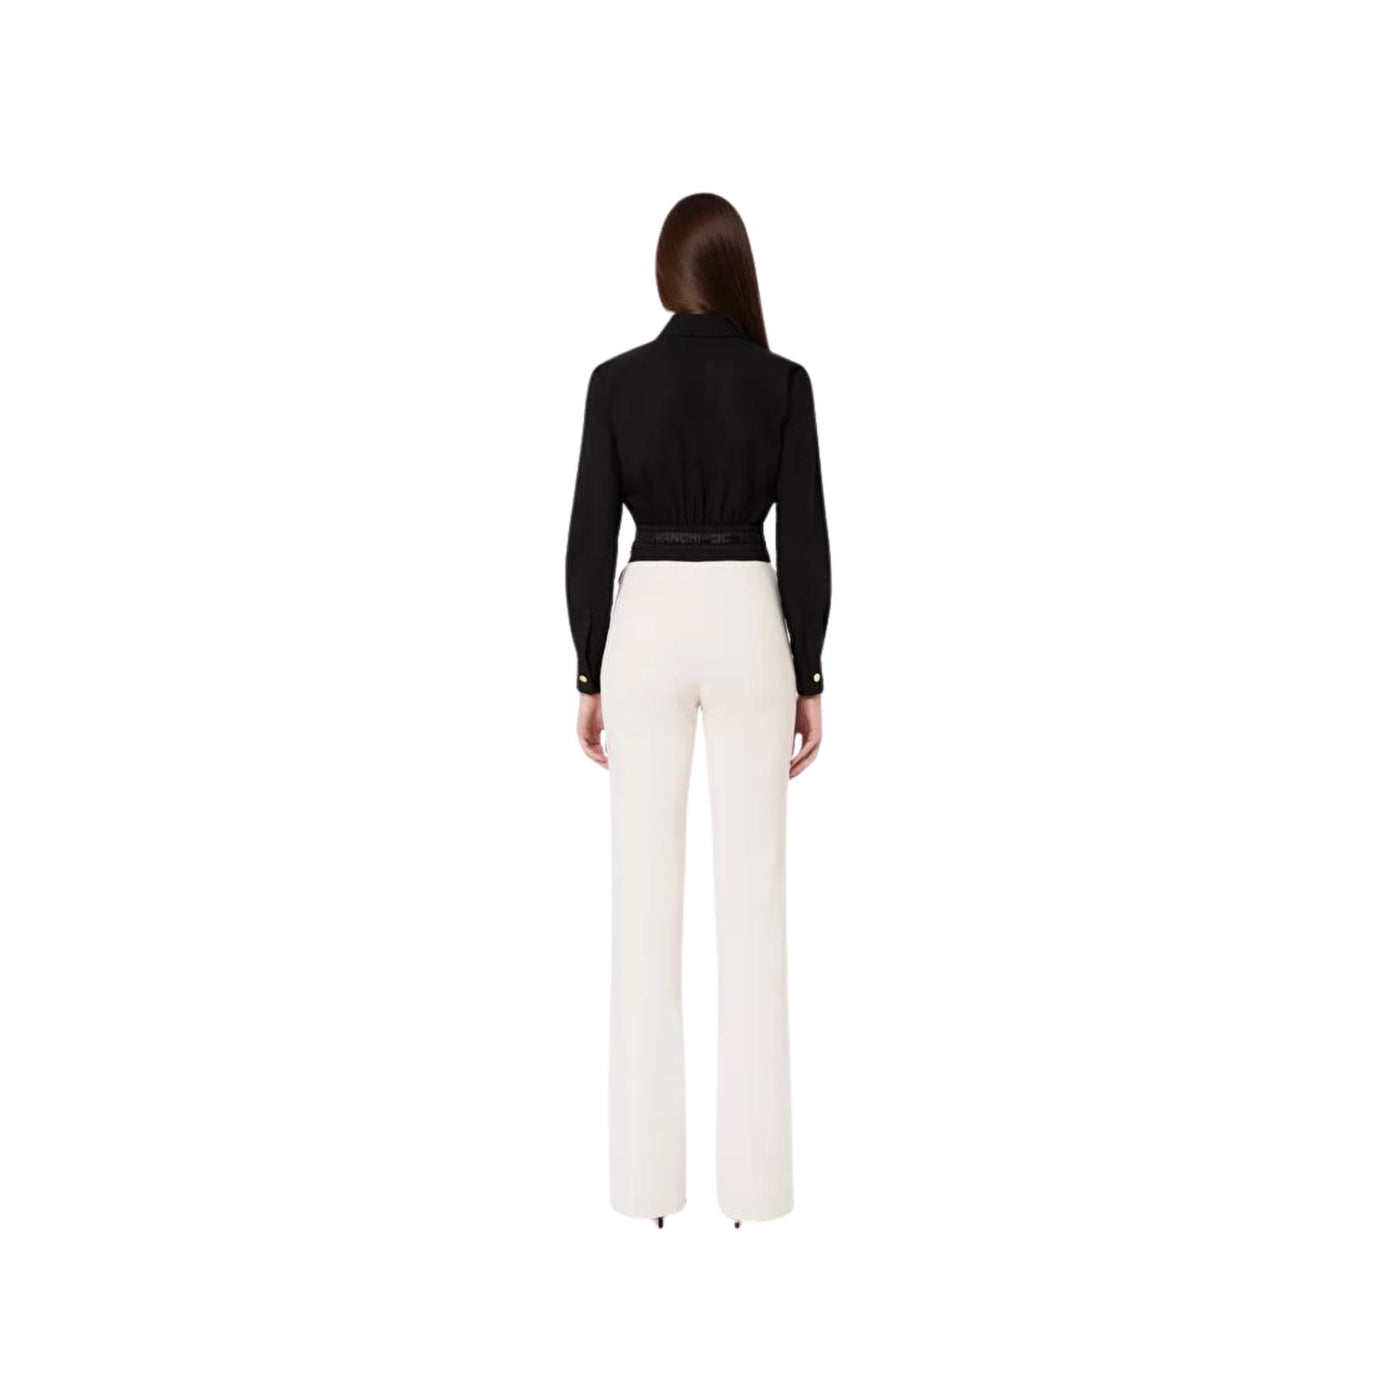 Women's trousers with flared leg at the bottom